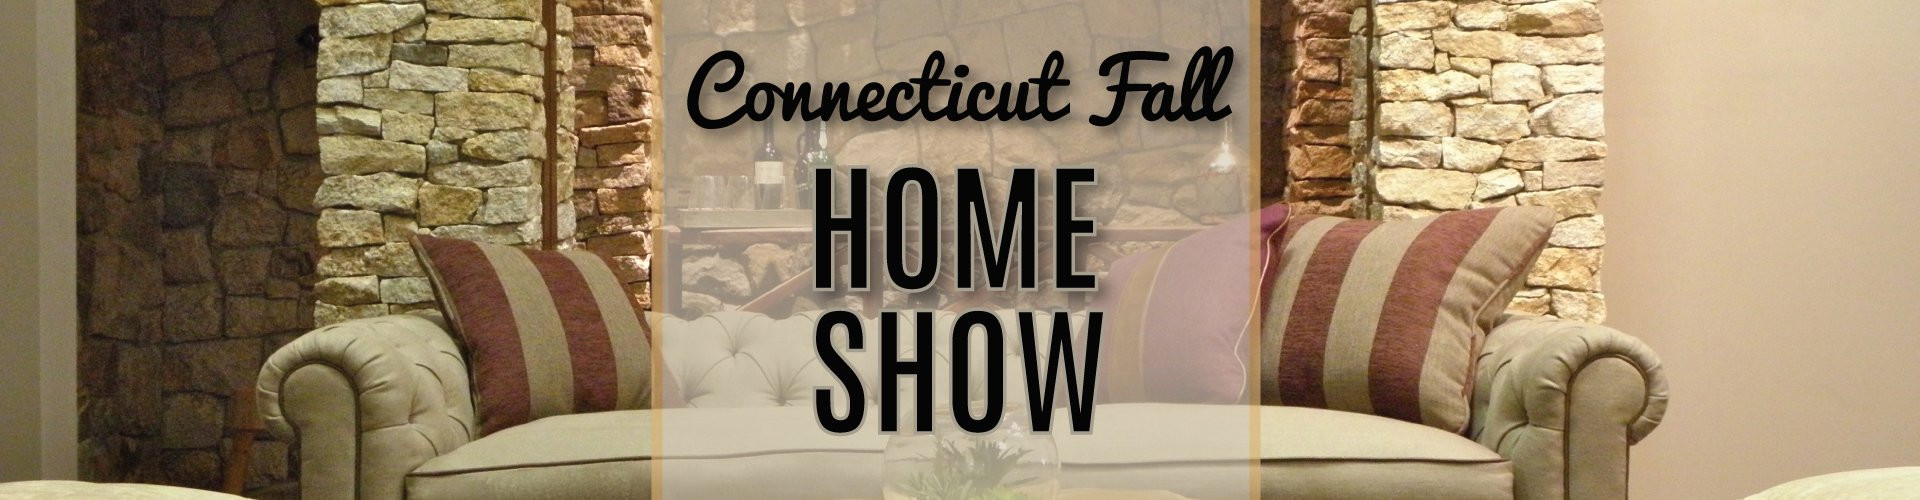 17 Stylish Hardwood Floor Refinishing East Hartford Ct 2022 free download hardwood floor refinishing east hartford ct of fall ct home show 2018 connecticut home expo jenks productions for ctfallhometopper